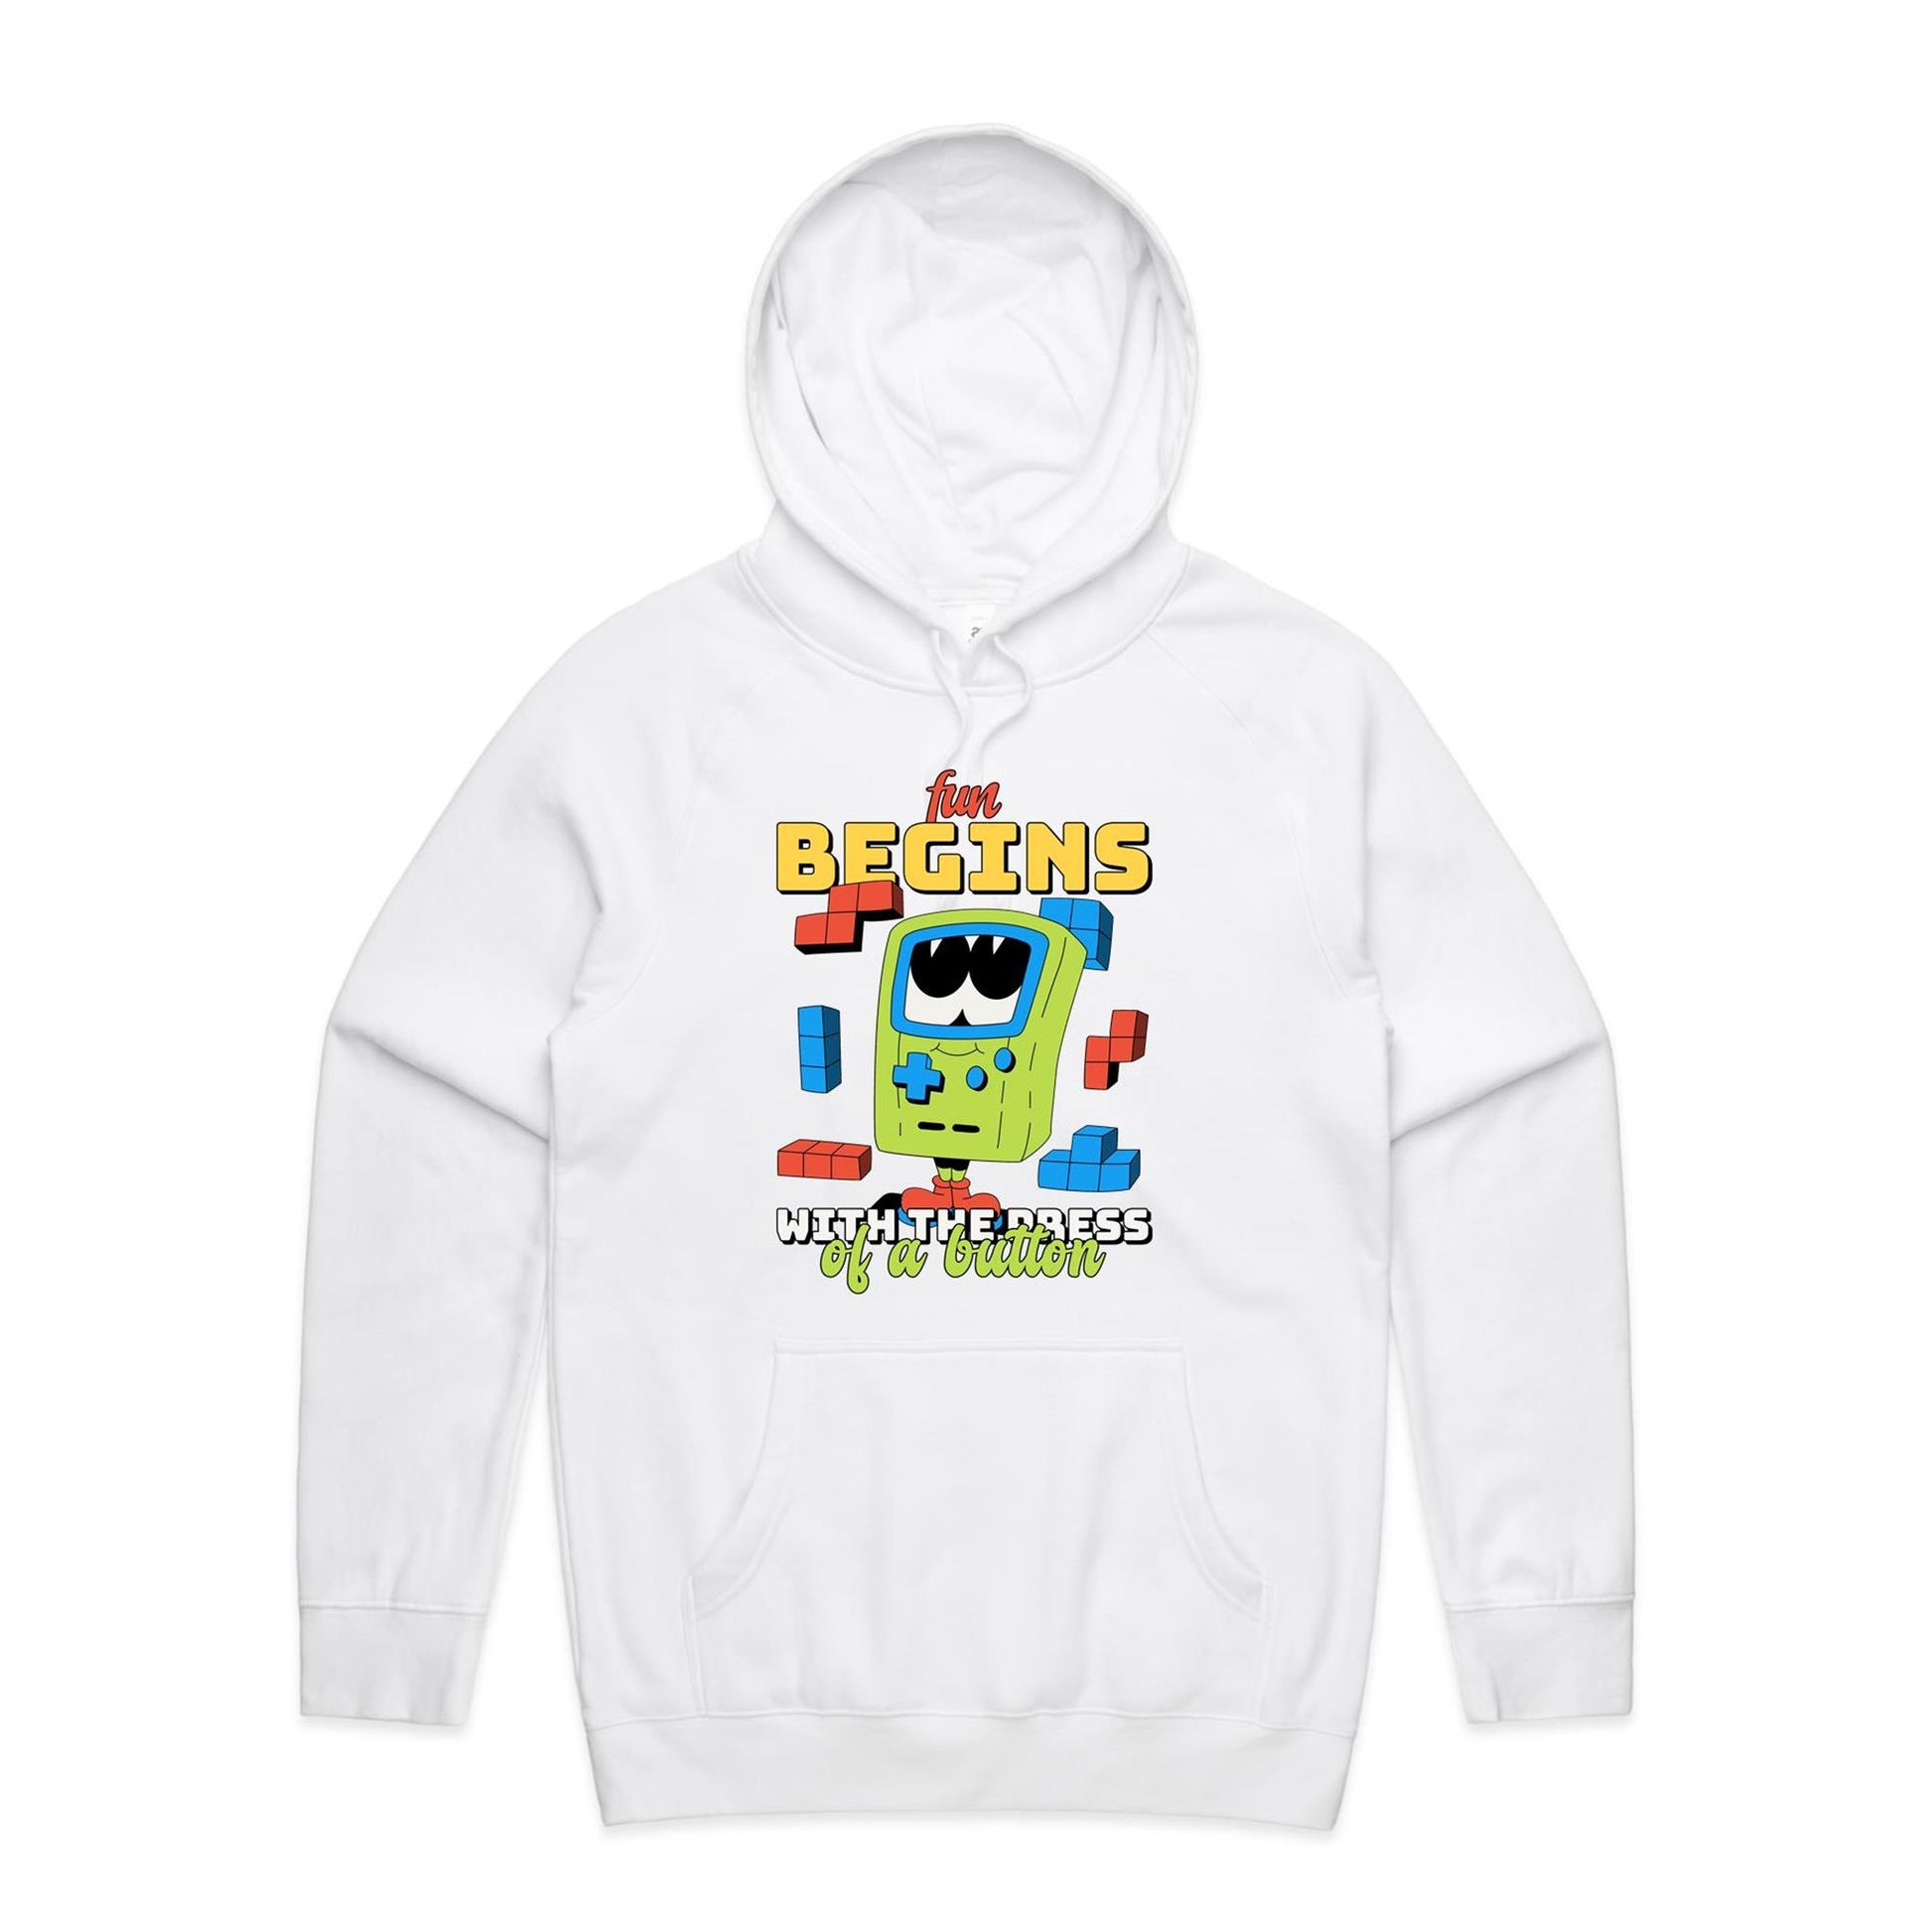 Fun Begins With The Press Of A Button - Supply Hood White Mens Supply Hoodie Games